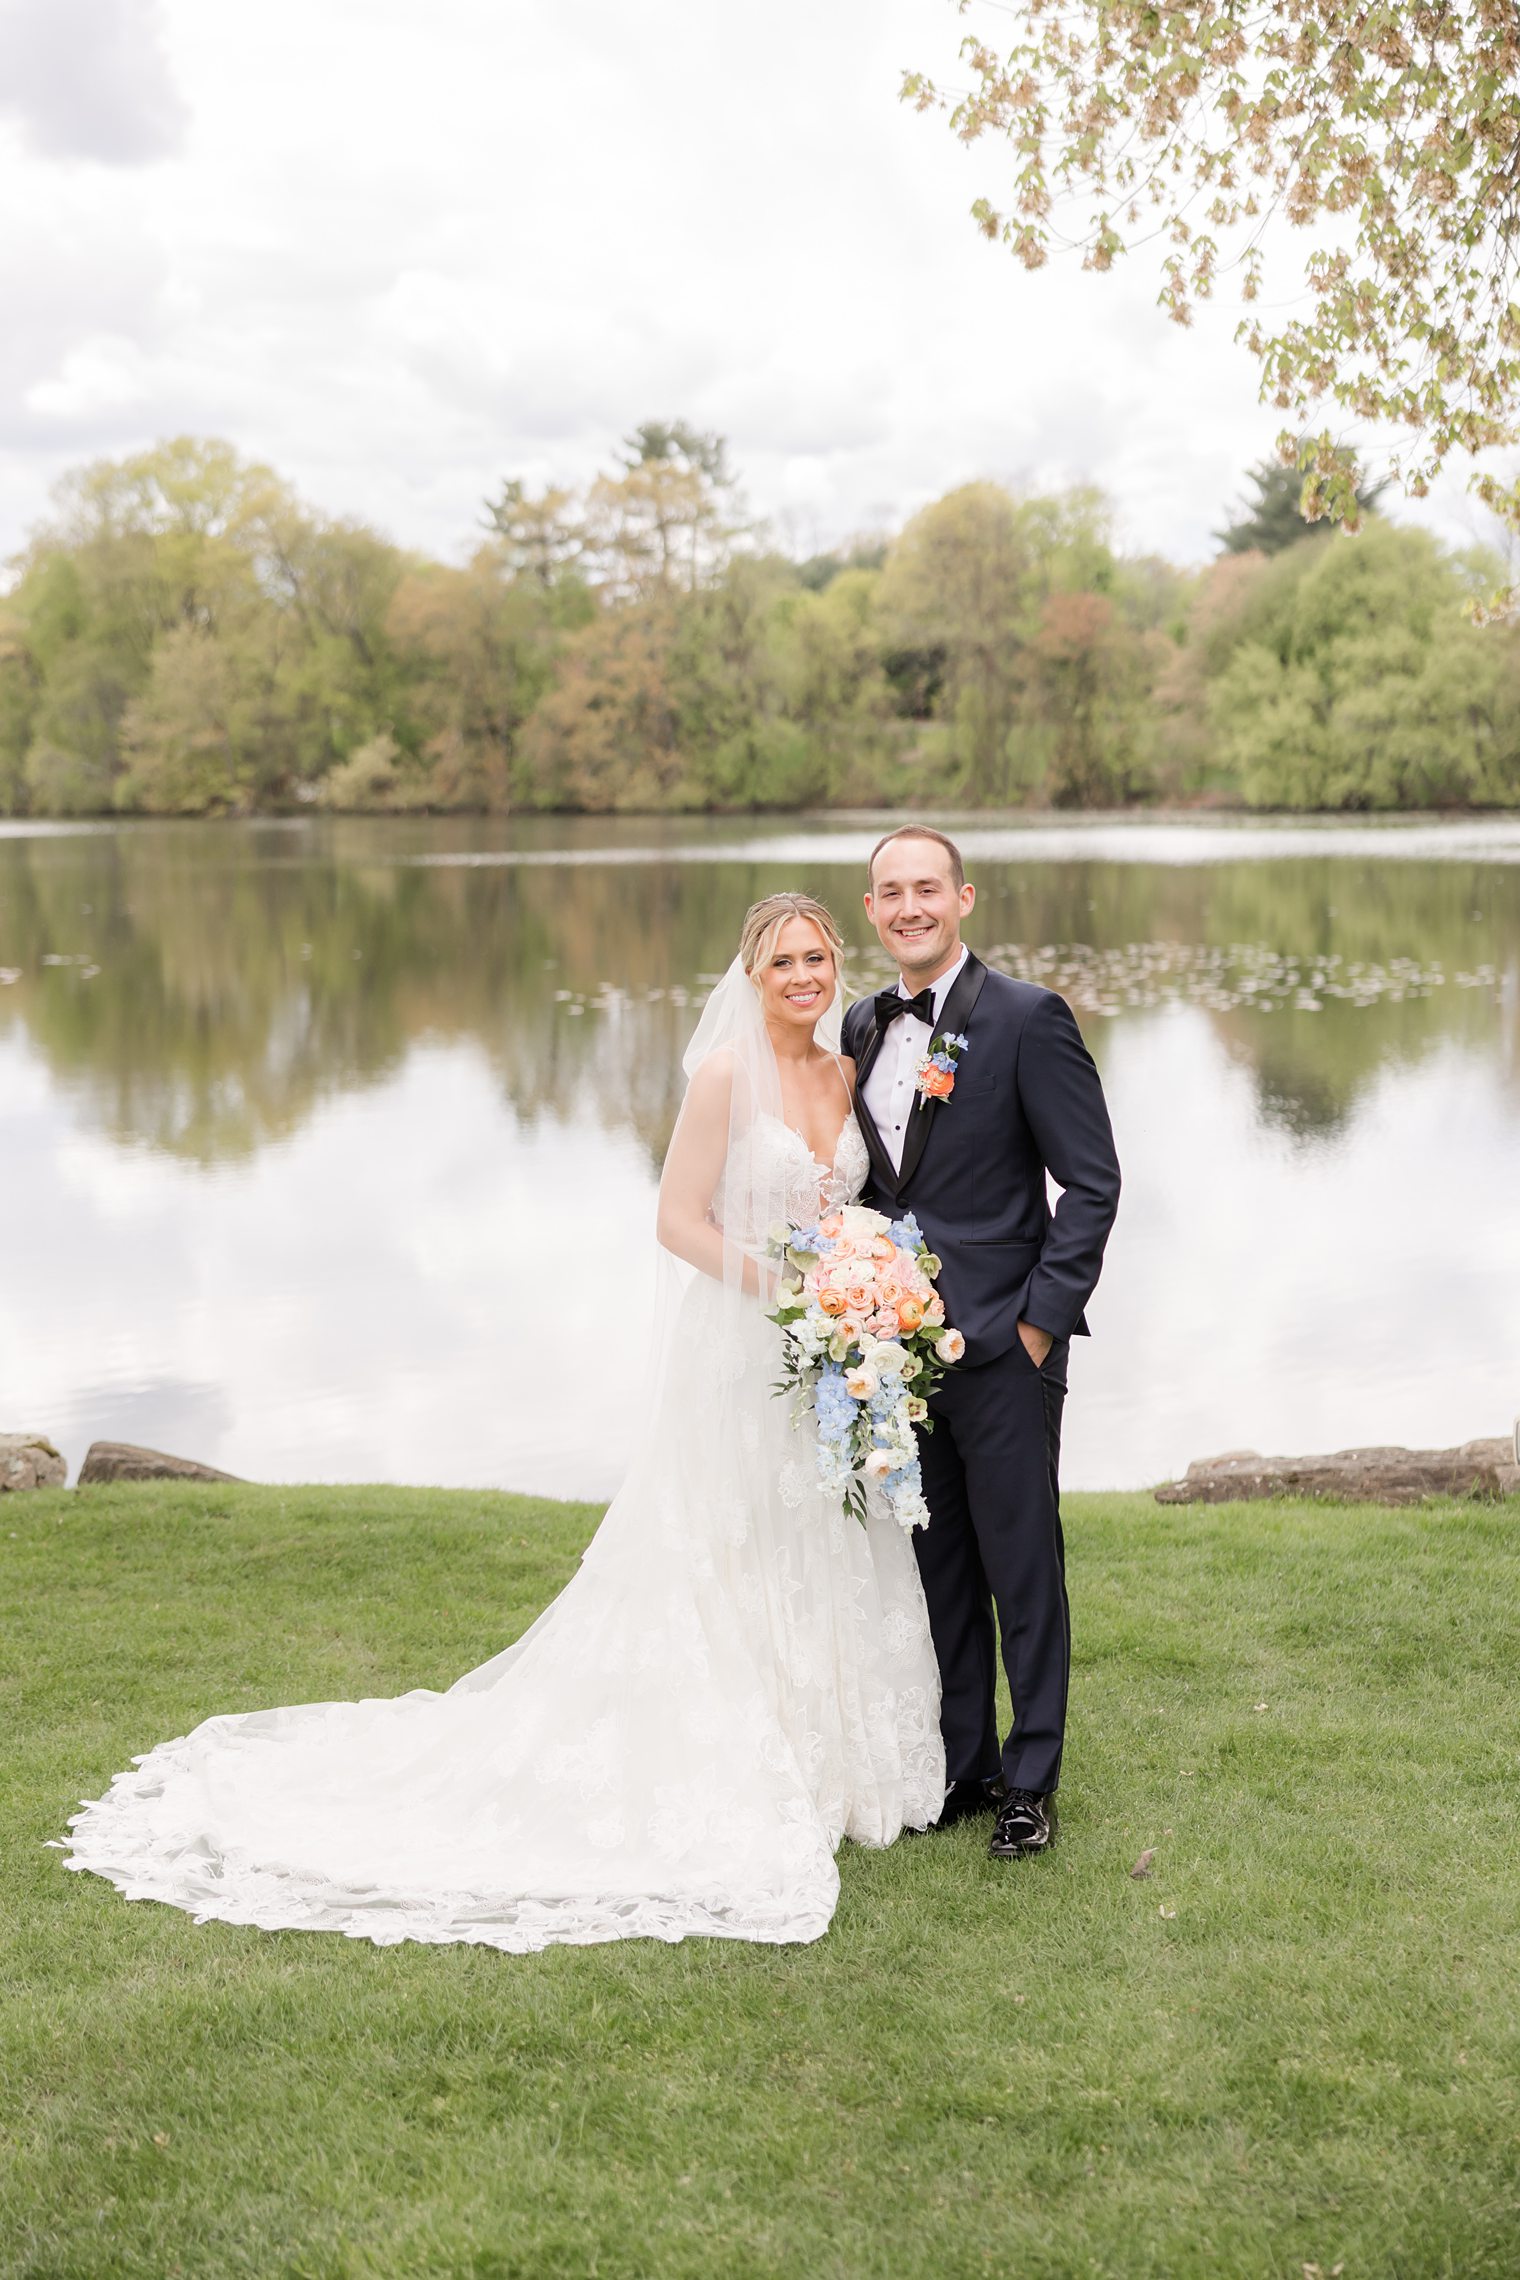 Couple sharing smiles after their first look as groom and bride at Indian Trail Club